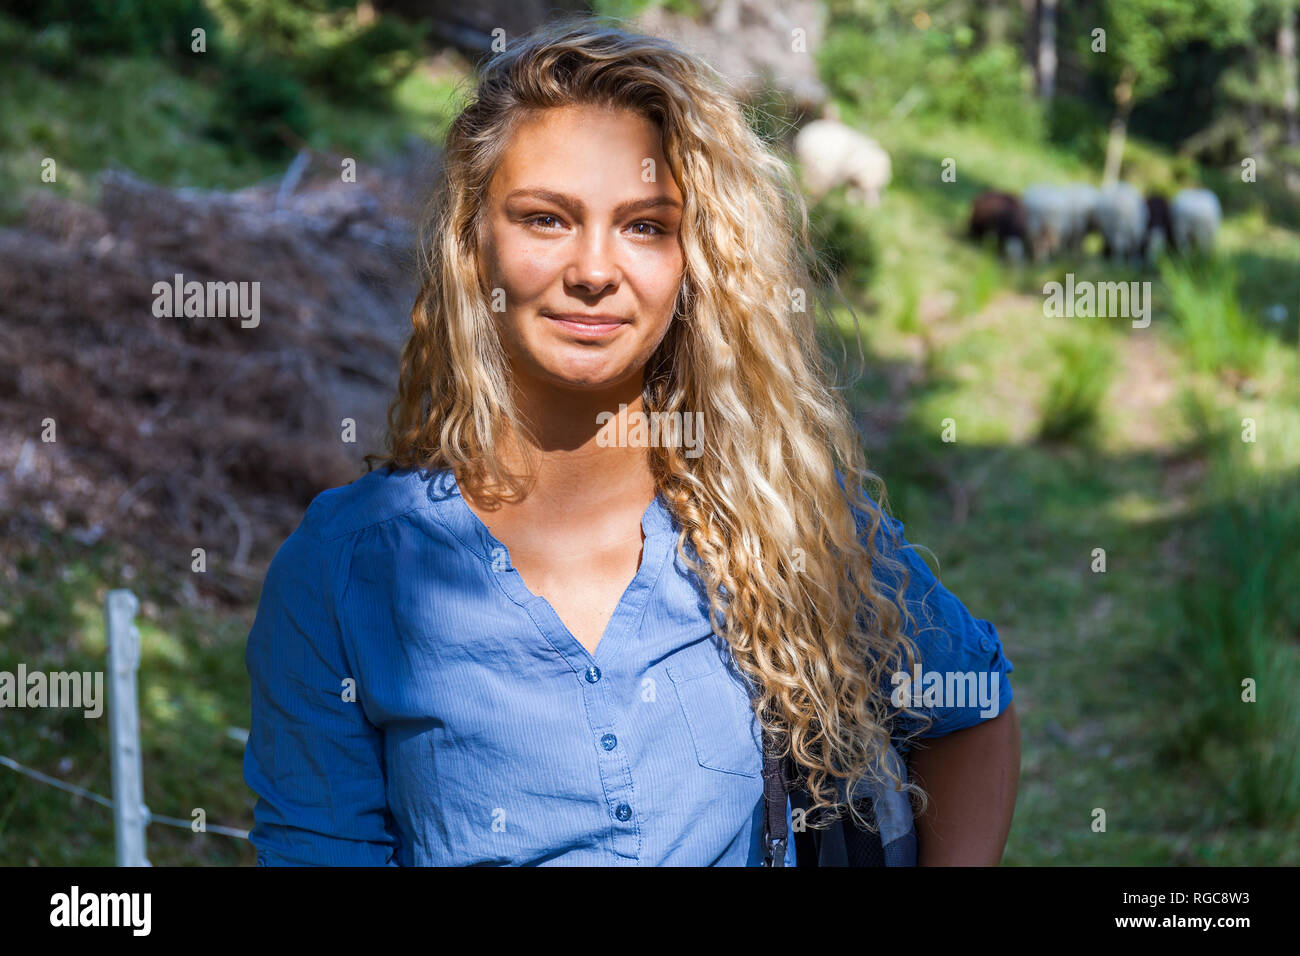 Germany, Bavaria, Oberammergau, portrait of smiling young woman on a hiking trip Stock Photo